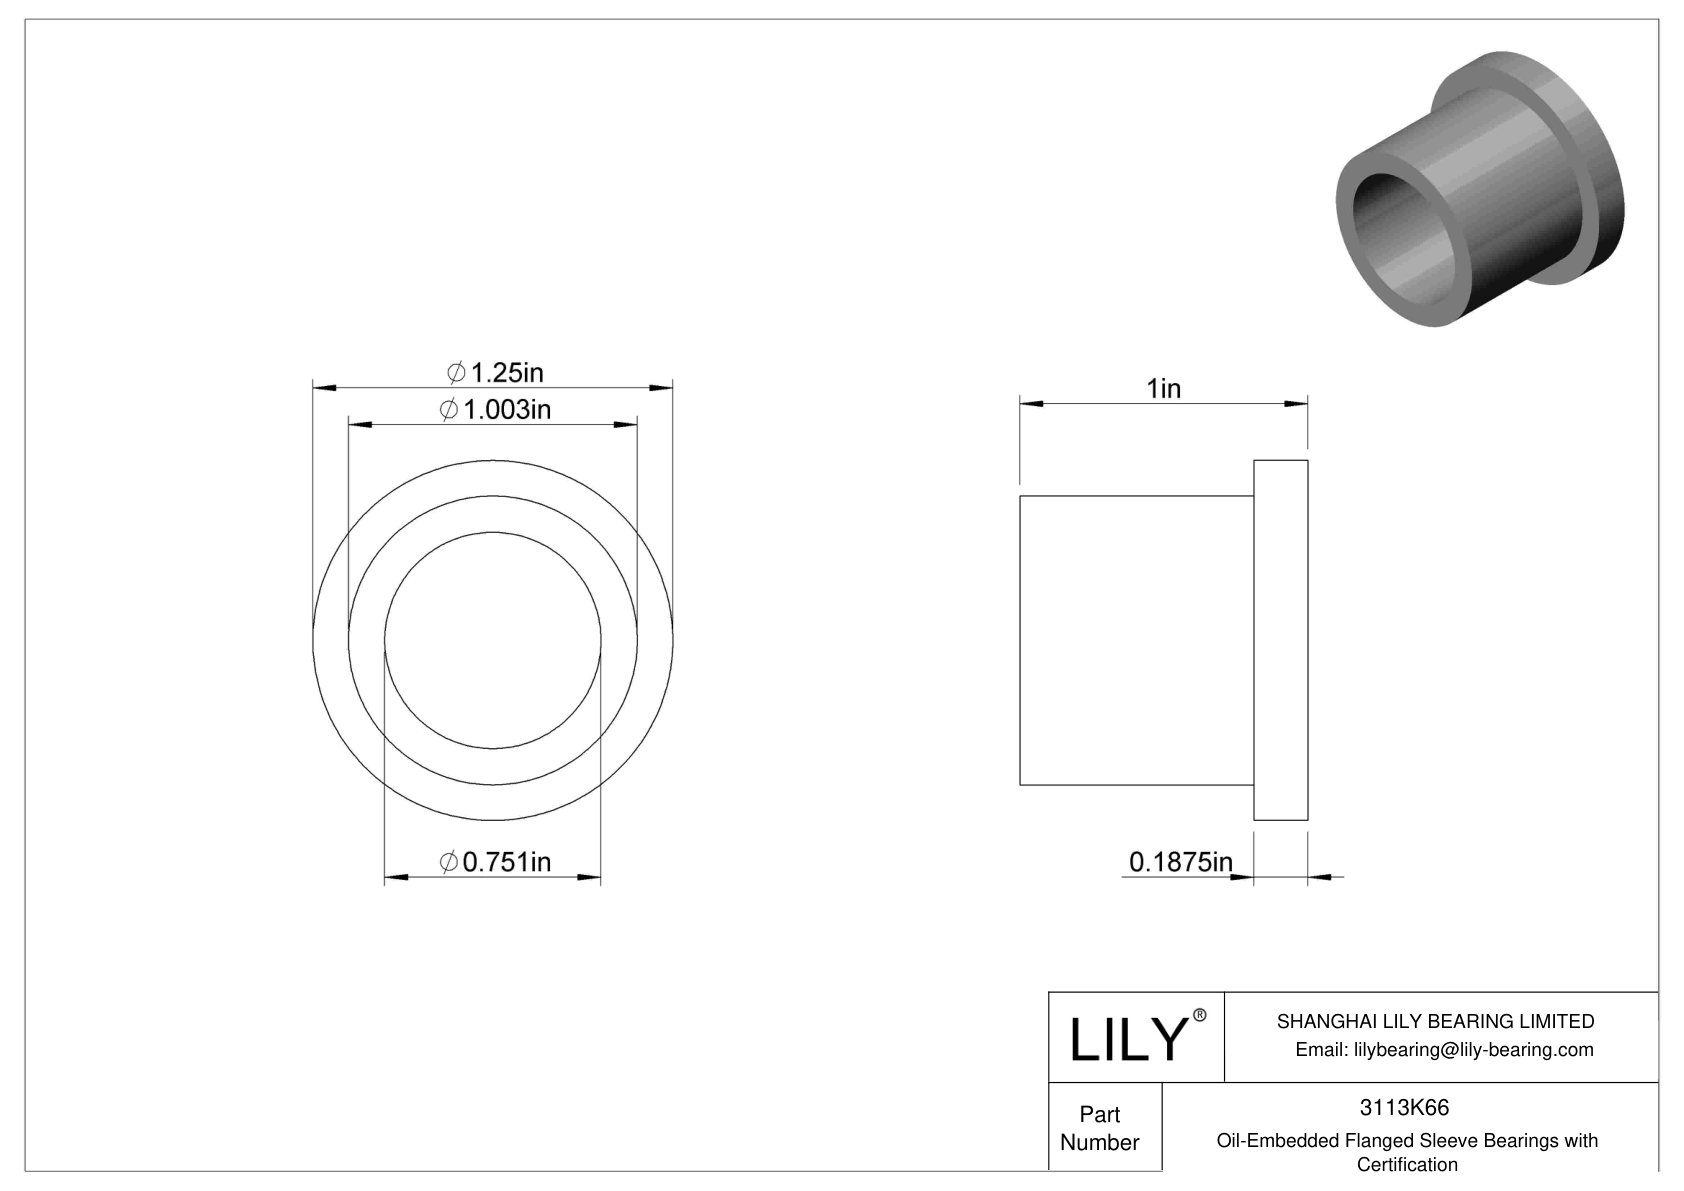 DBBDKGG Oil-Embedded Flanged Sleeve Bearings with Certification cad drawing